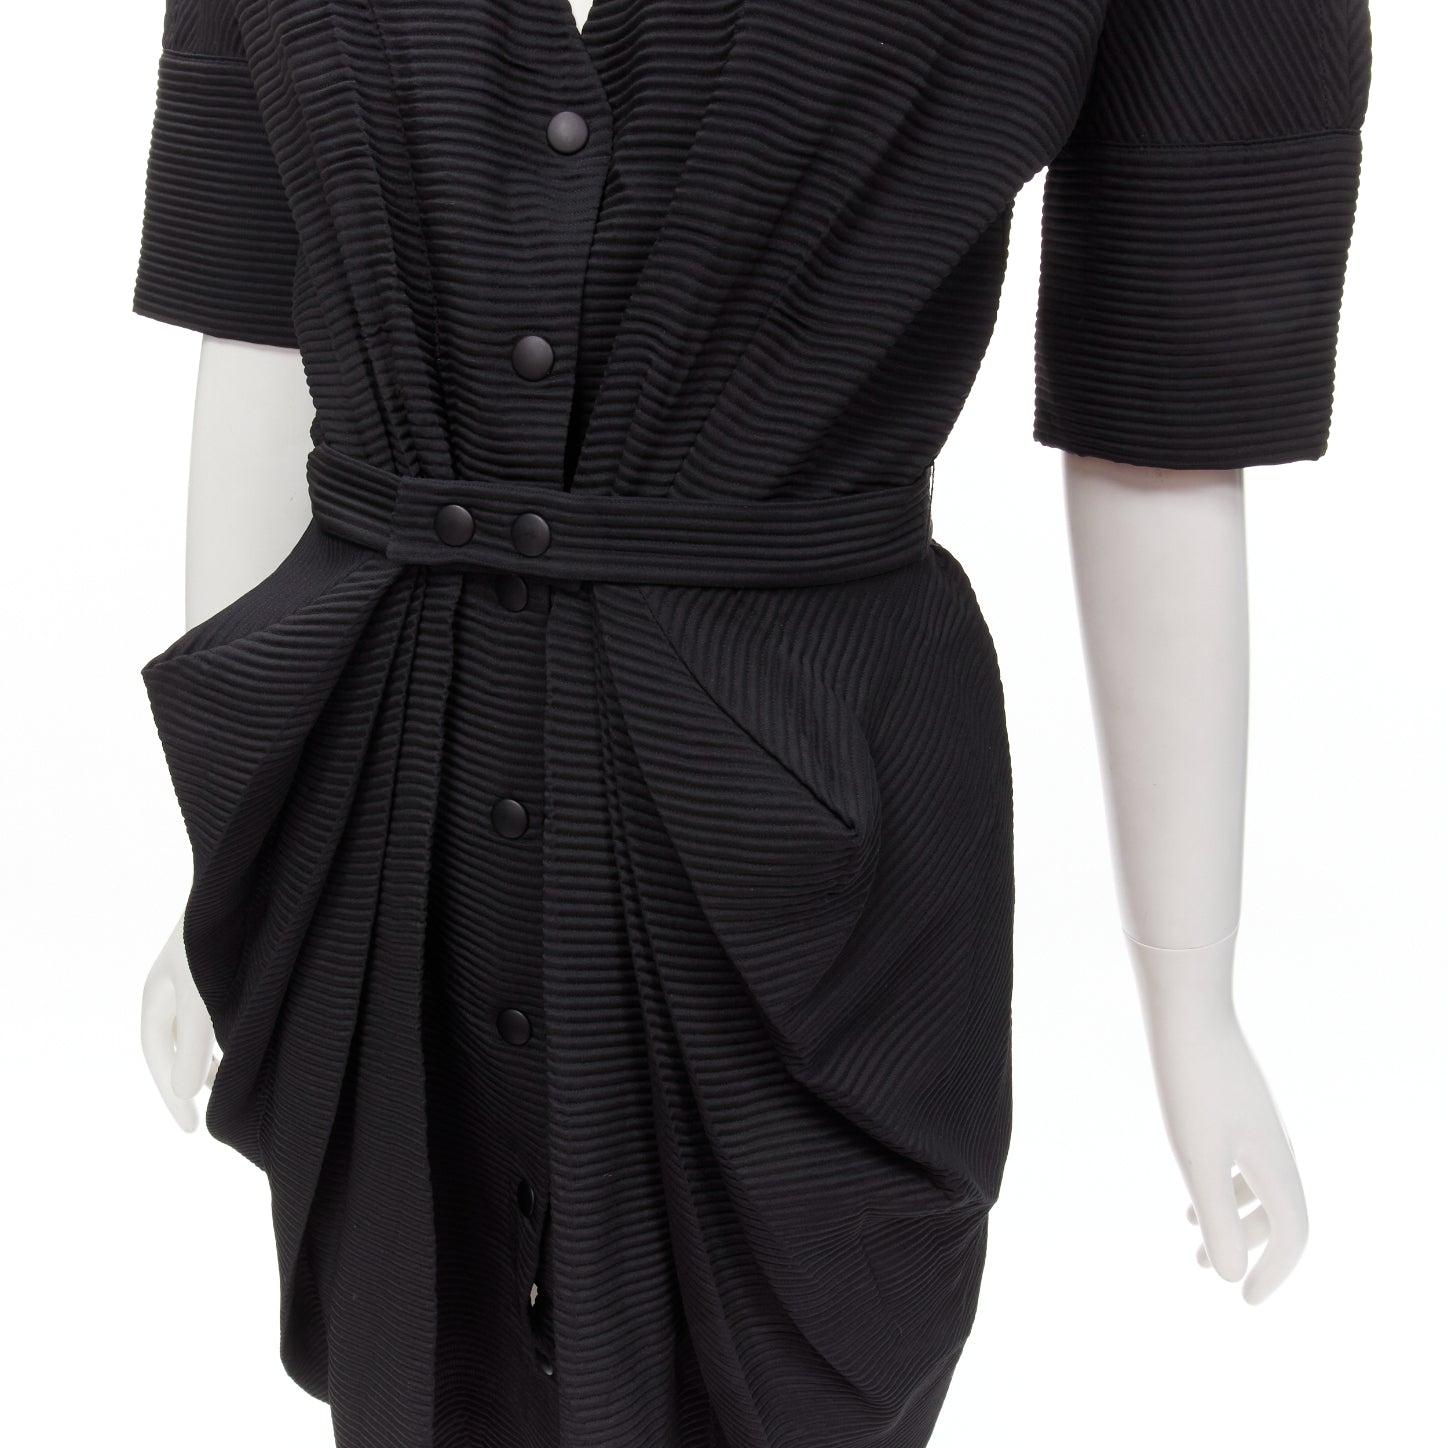 BALENCIAGA 2009 plunge neckline button front gathered pleat short dress FR36 S
Reference: CAWG/A00234
Brand: Balenciaga
Designer: Nicolas Ghesquiere
Collection: 2009
Material: Polyester, Acrylic
Color: Black
Pattern: Solid
Closure: Snap